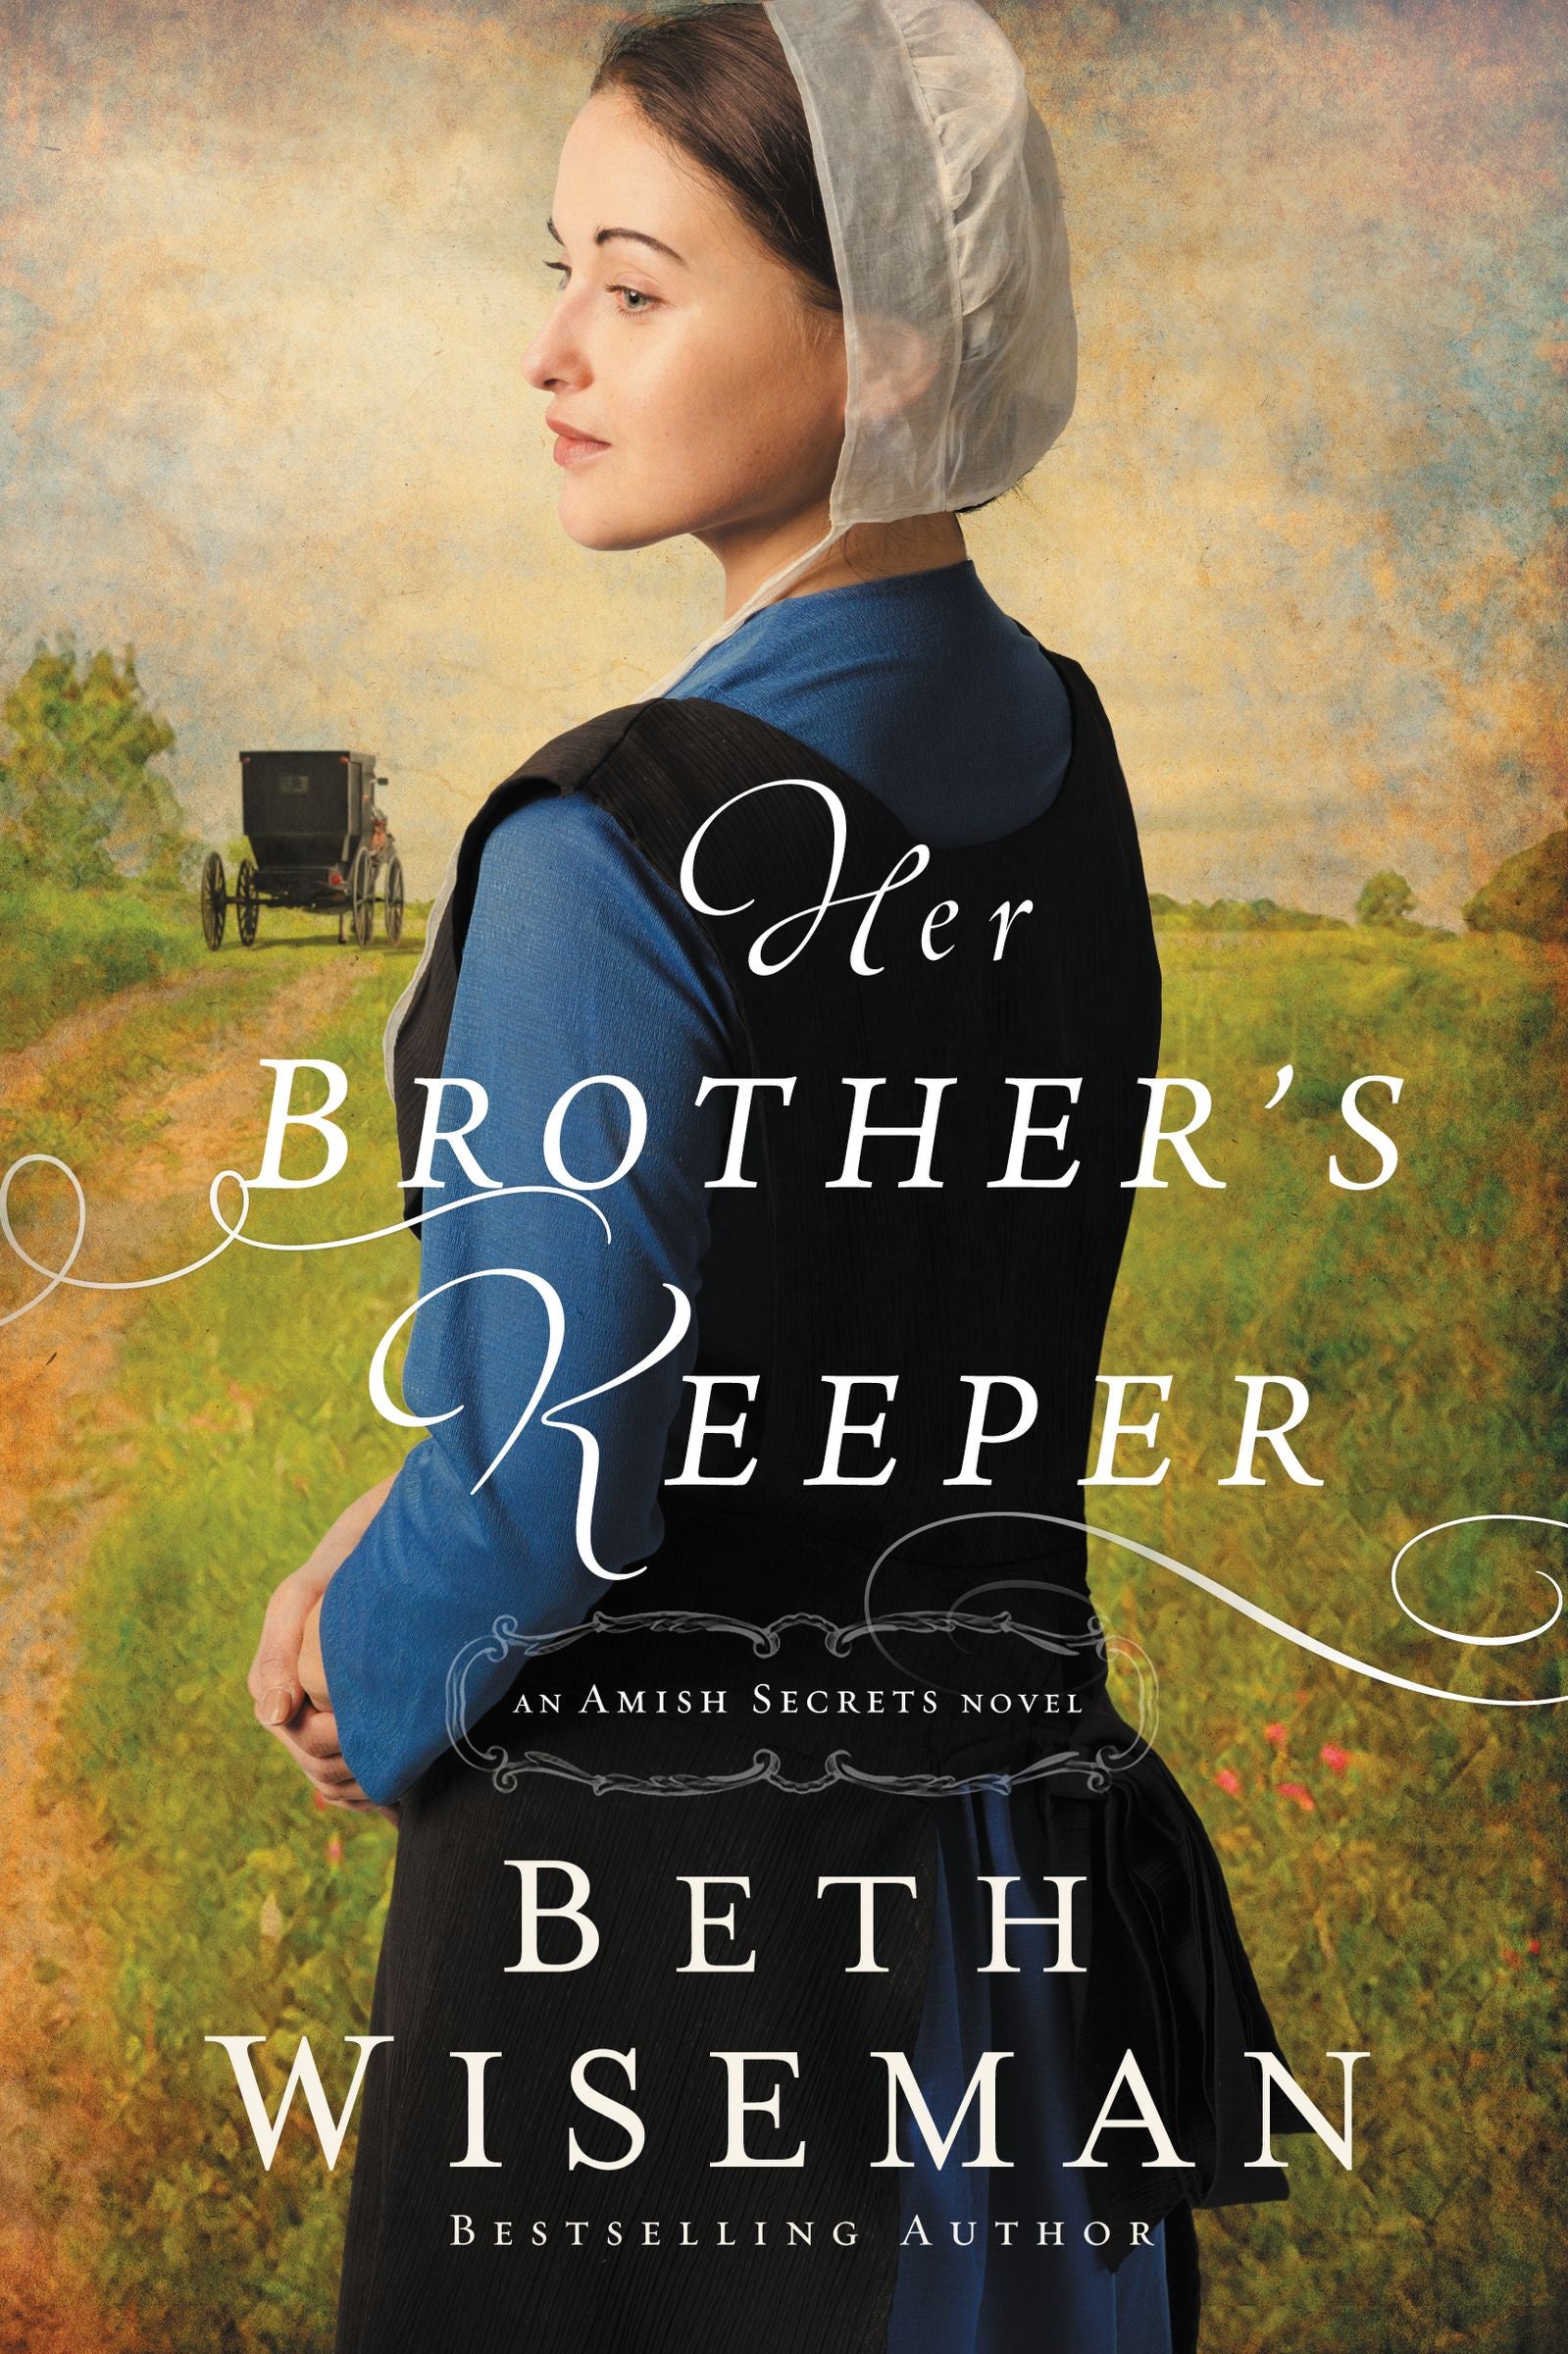 Image of Her Brother's Keeper other